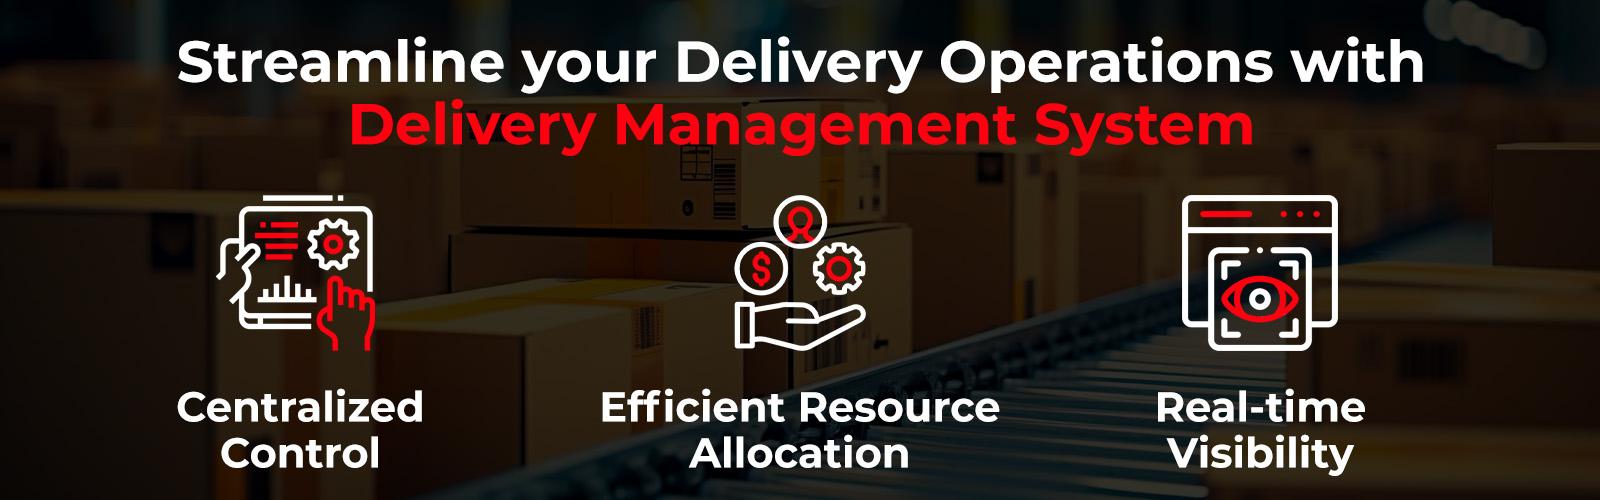 Streamline Delivery Operations with Delivery Management System